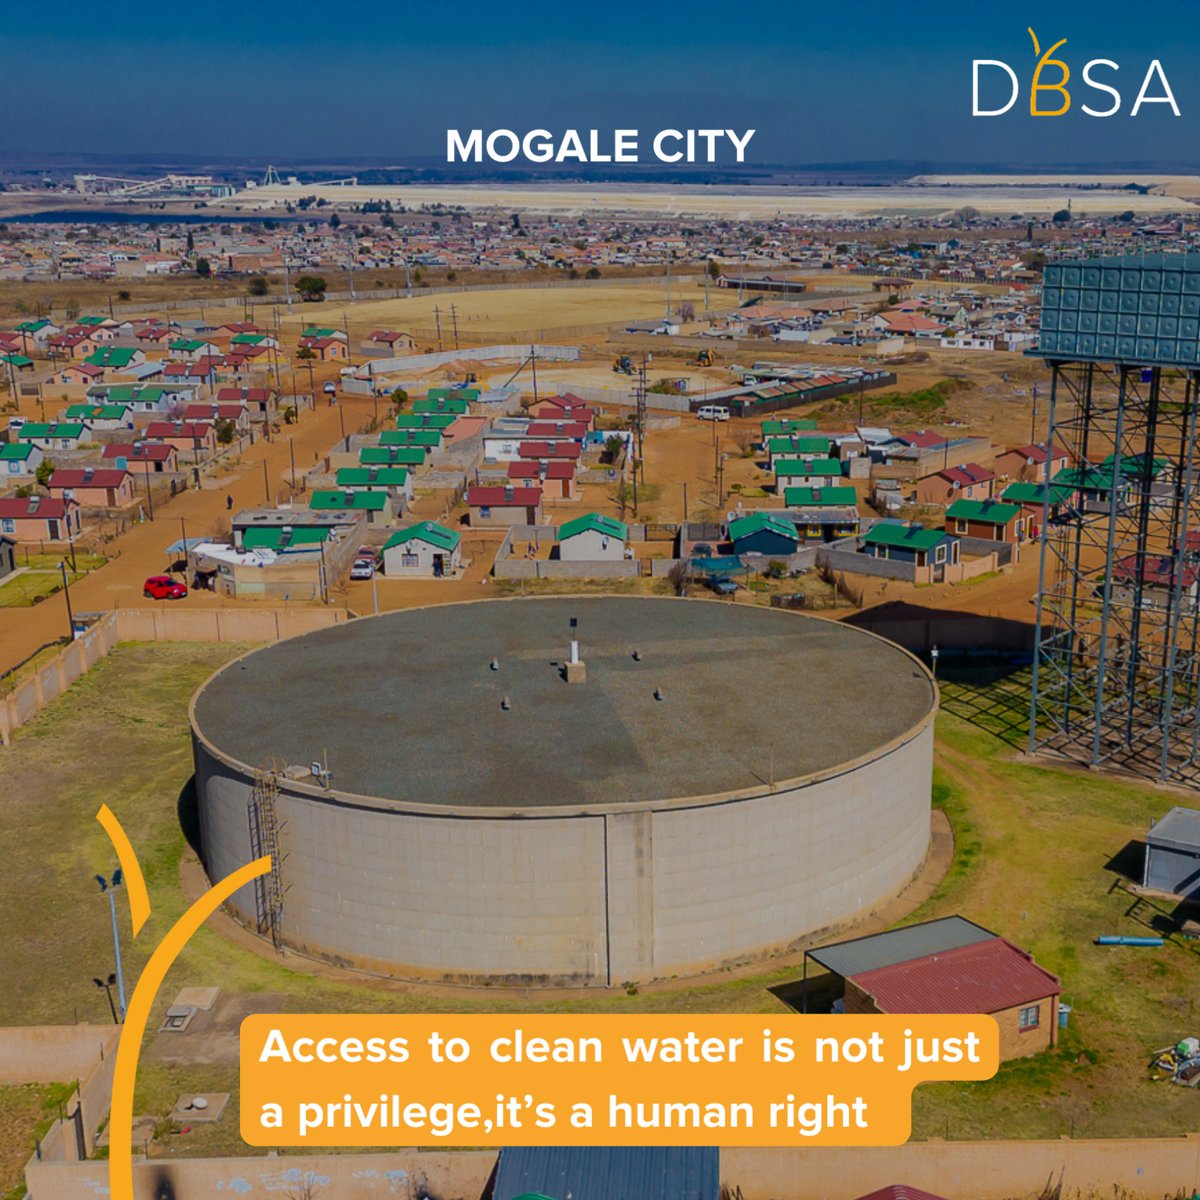 The DBSA provided an R87 million loan to Mogale City, a municipality committed to improving water and sanitation services, particularly in Chief Mogale Housing Development. The funding includes infrastructure developments like a bulk water line and pump station. #DBSAProjects